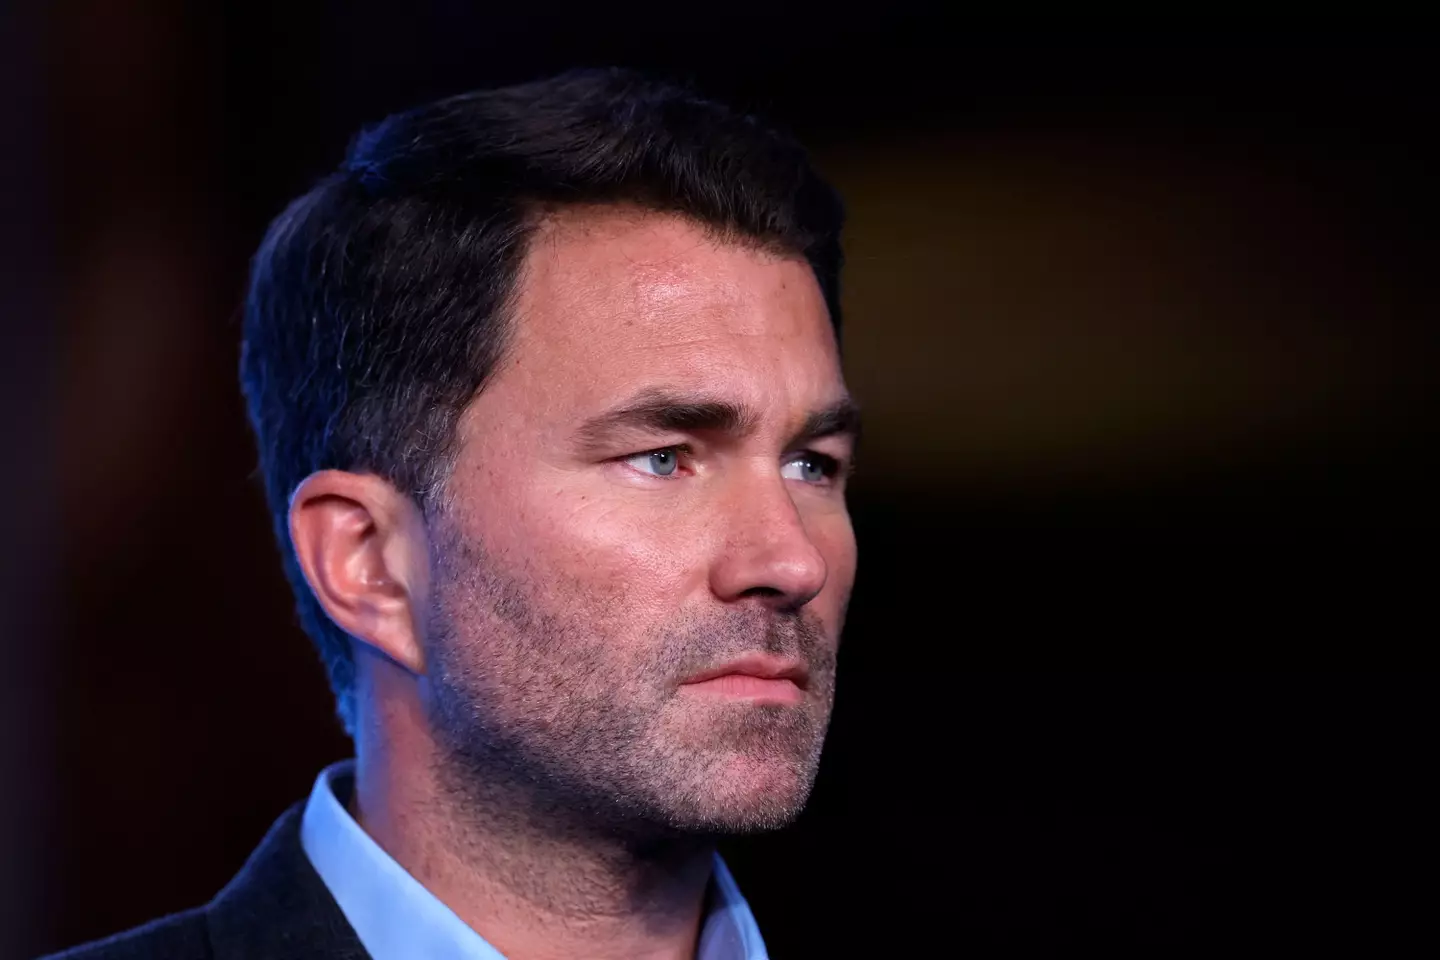 Joshua's promoter Eddie Hearn has confirmed the contracts are yet to be signed for the Fury fight (Image: Alamy)